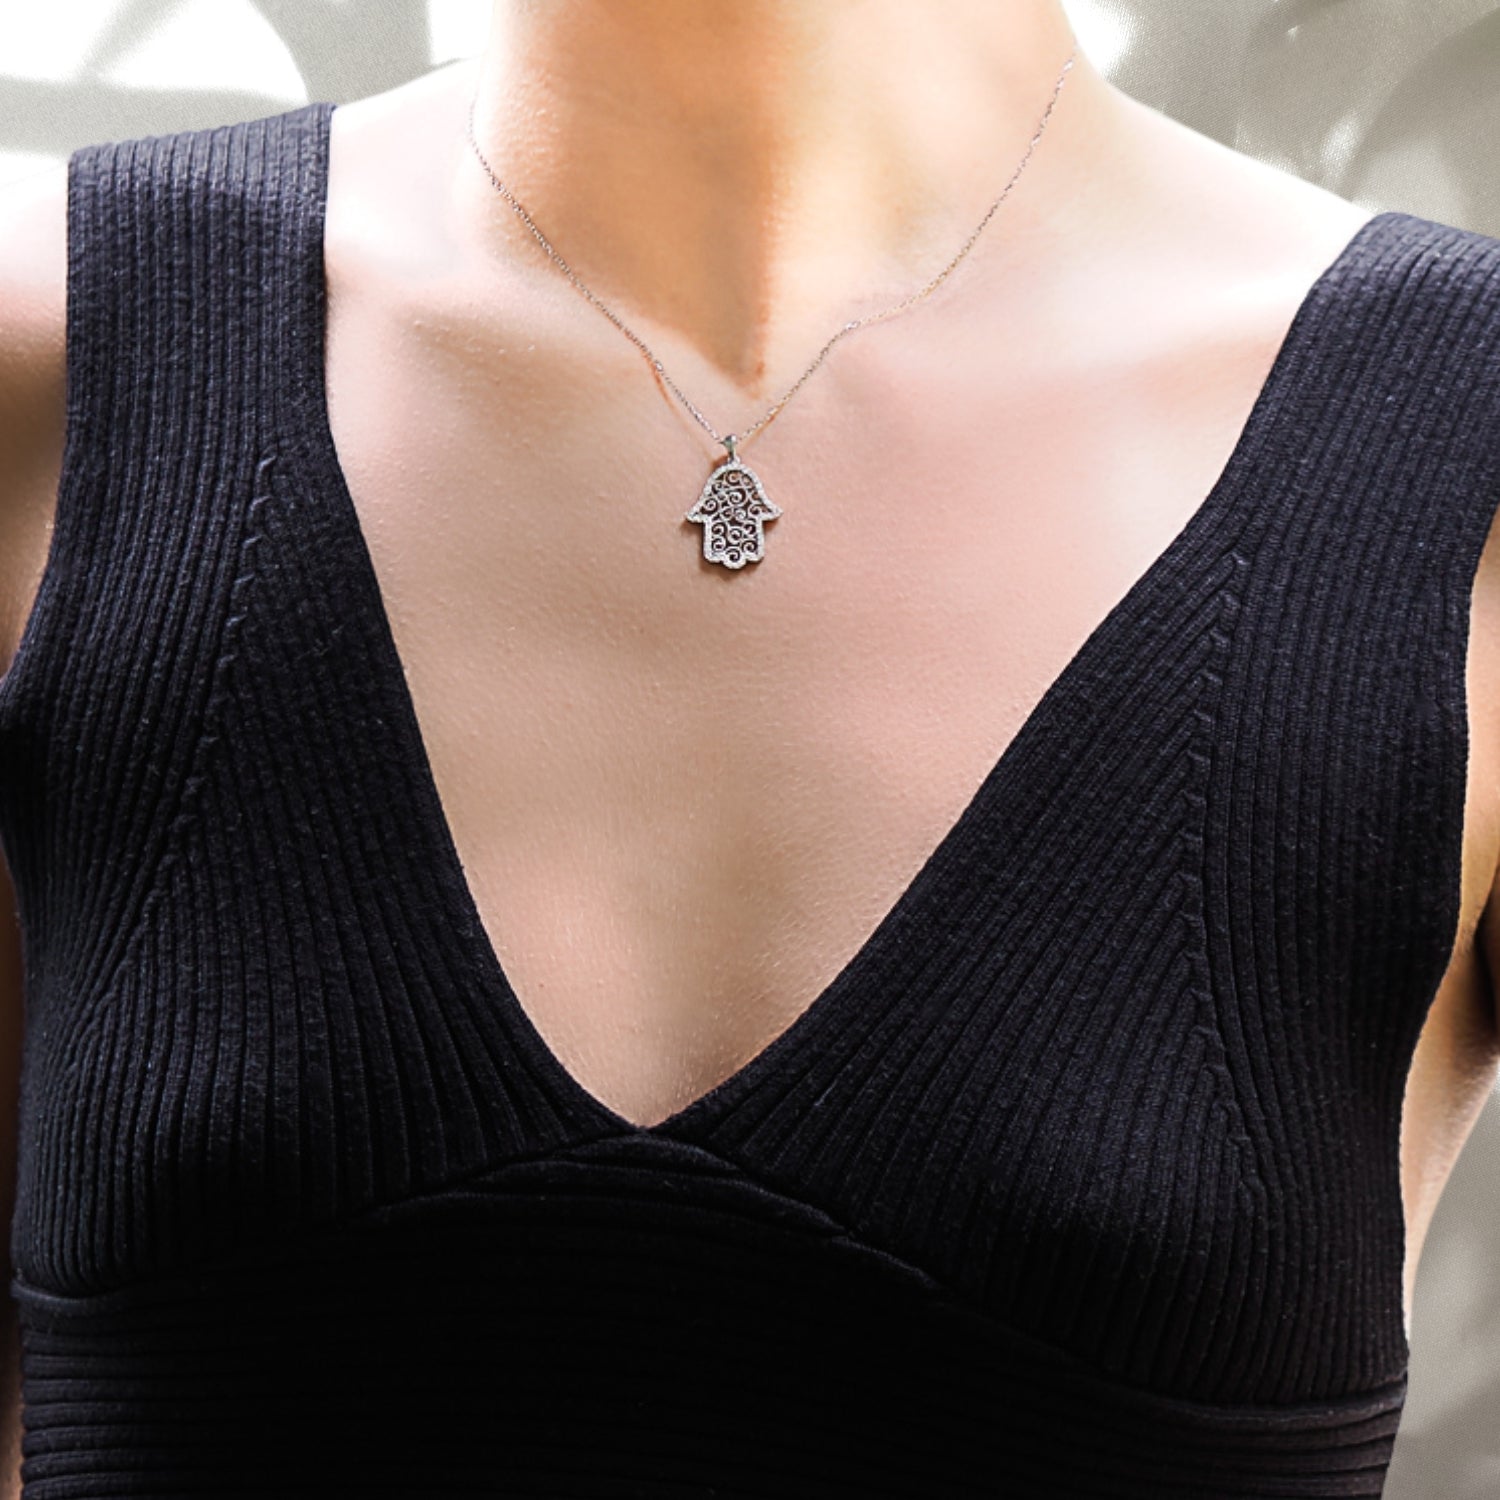 With grace and style, the model wears the Spiral Hamsa Necklace, highlighting the delicate Hamsa pendant adorned with sparkling CZ diamonds, representing blessings and good fortune.